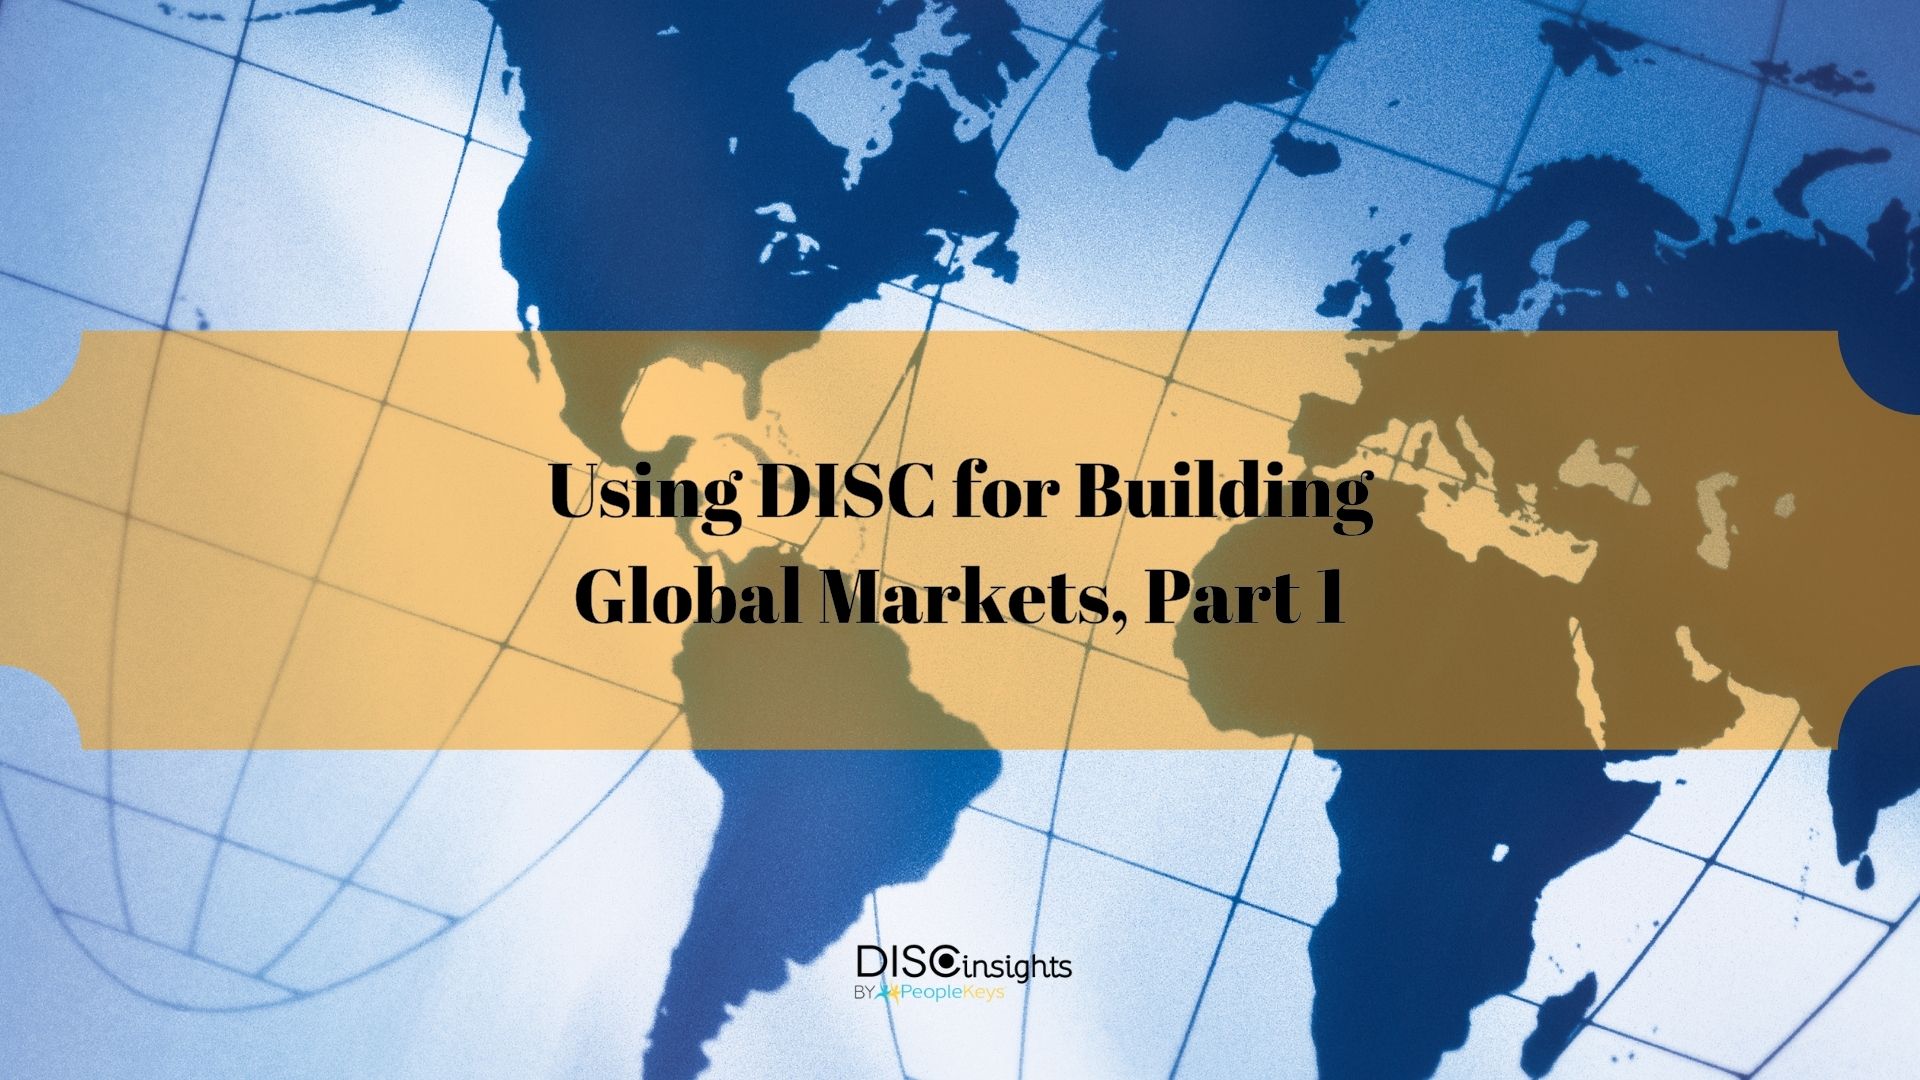 Using DISC for Building Global Markets, Part 1